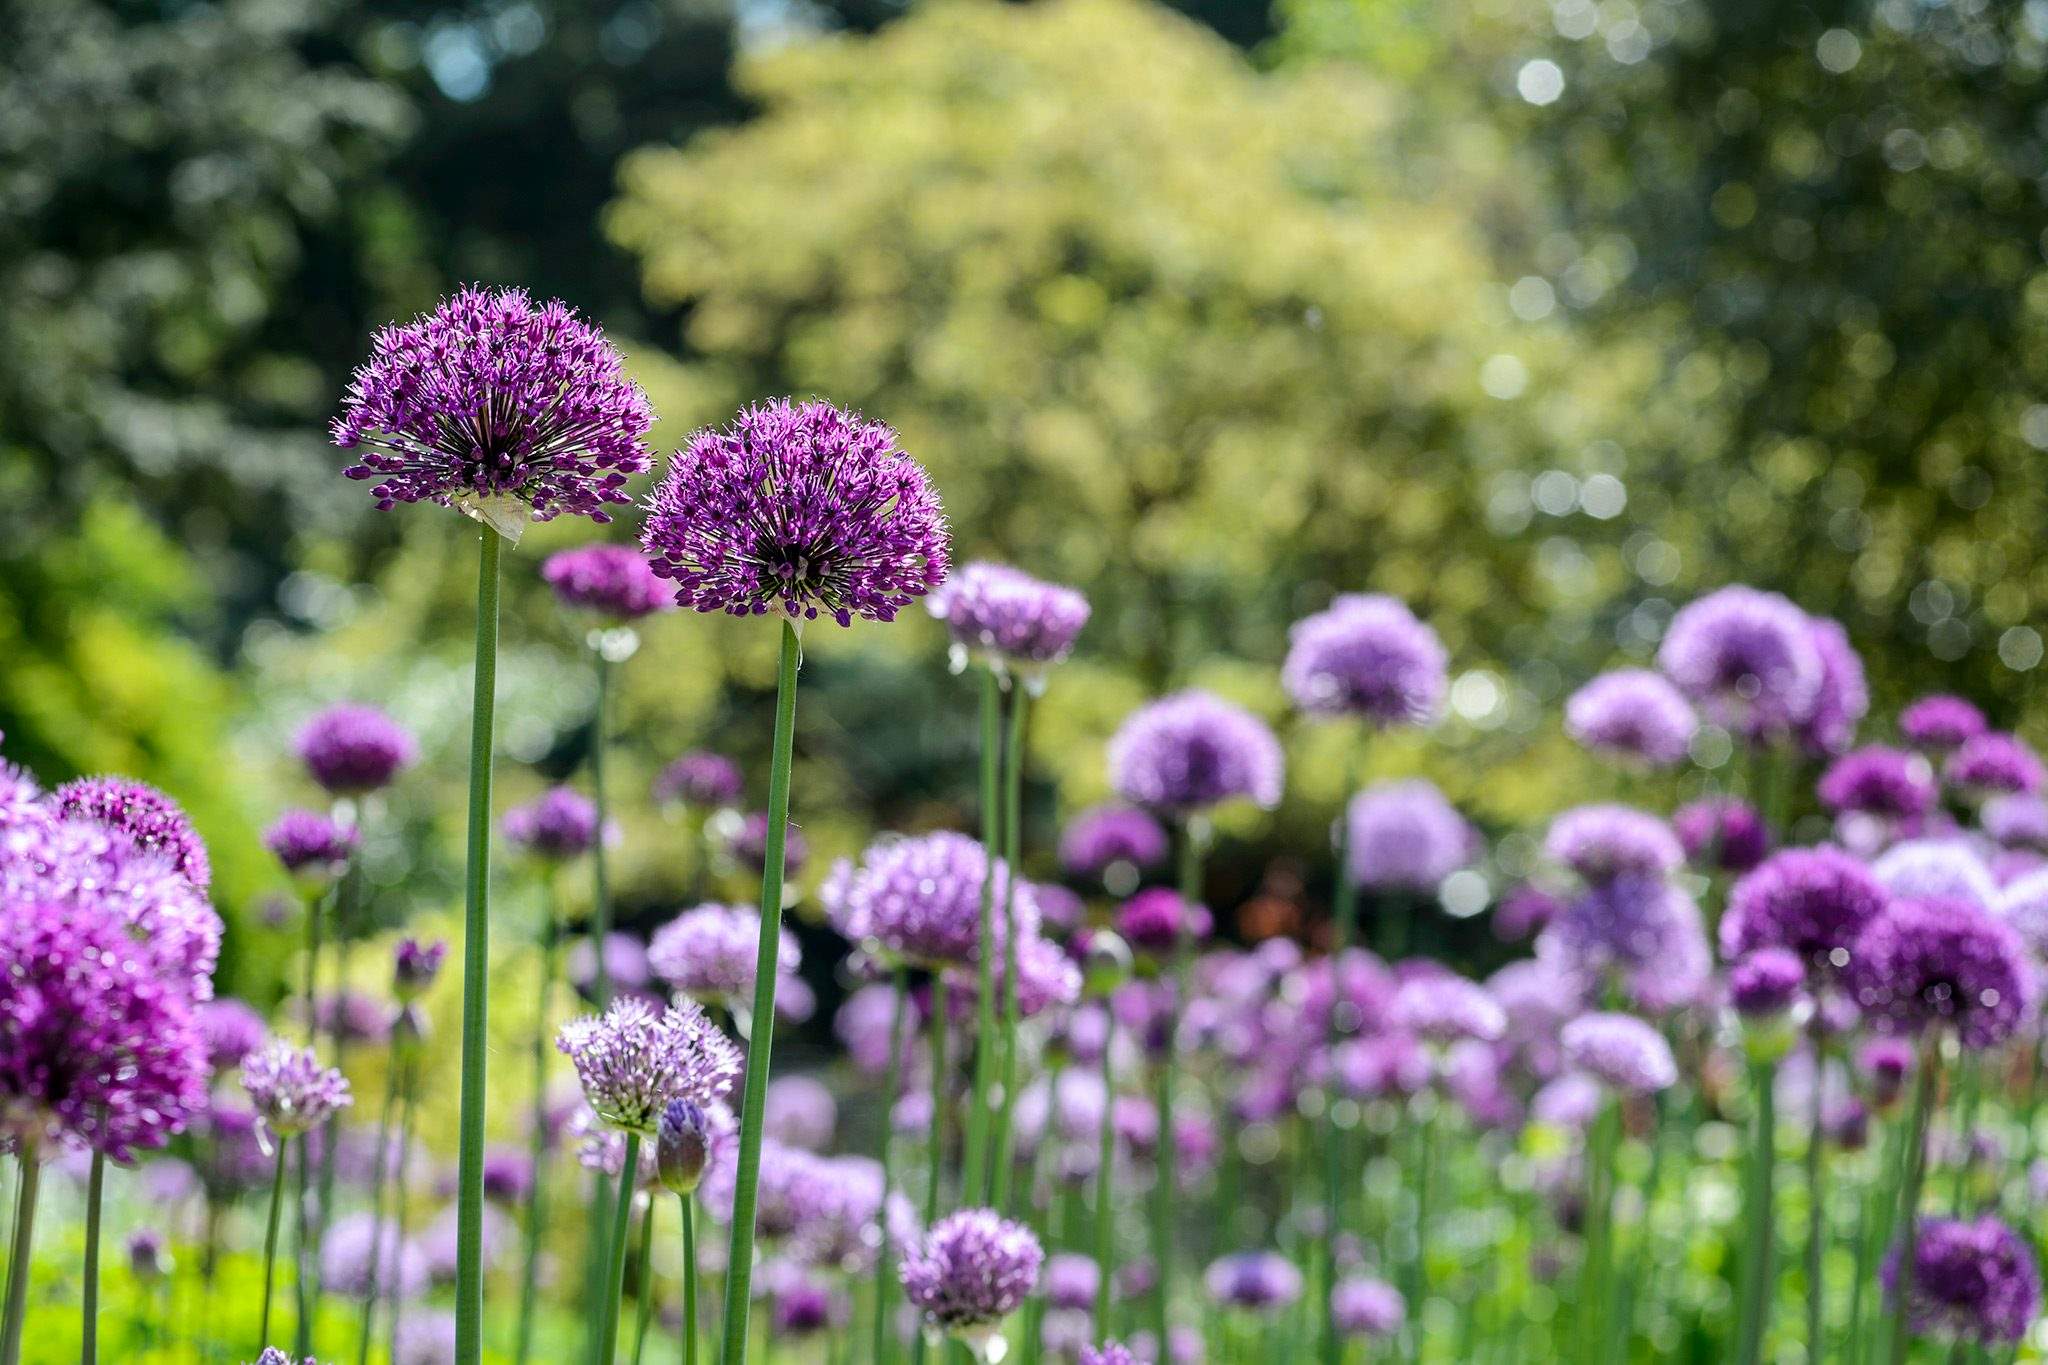 How to Plant Allium Bulbs: Which Way Is Up?